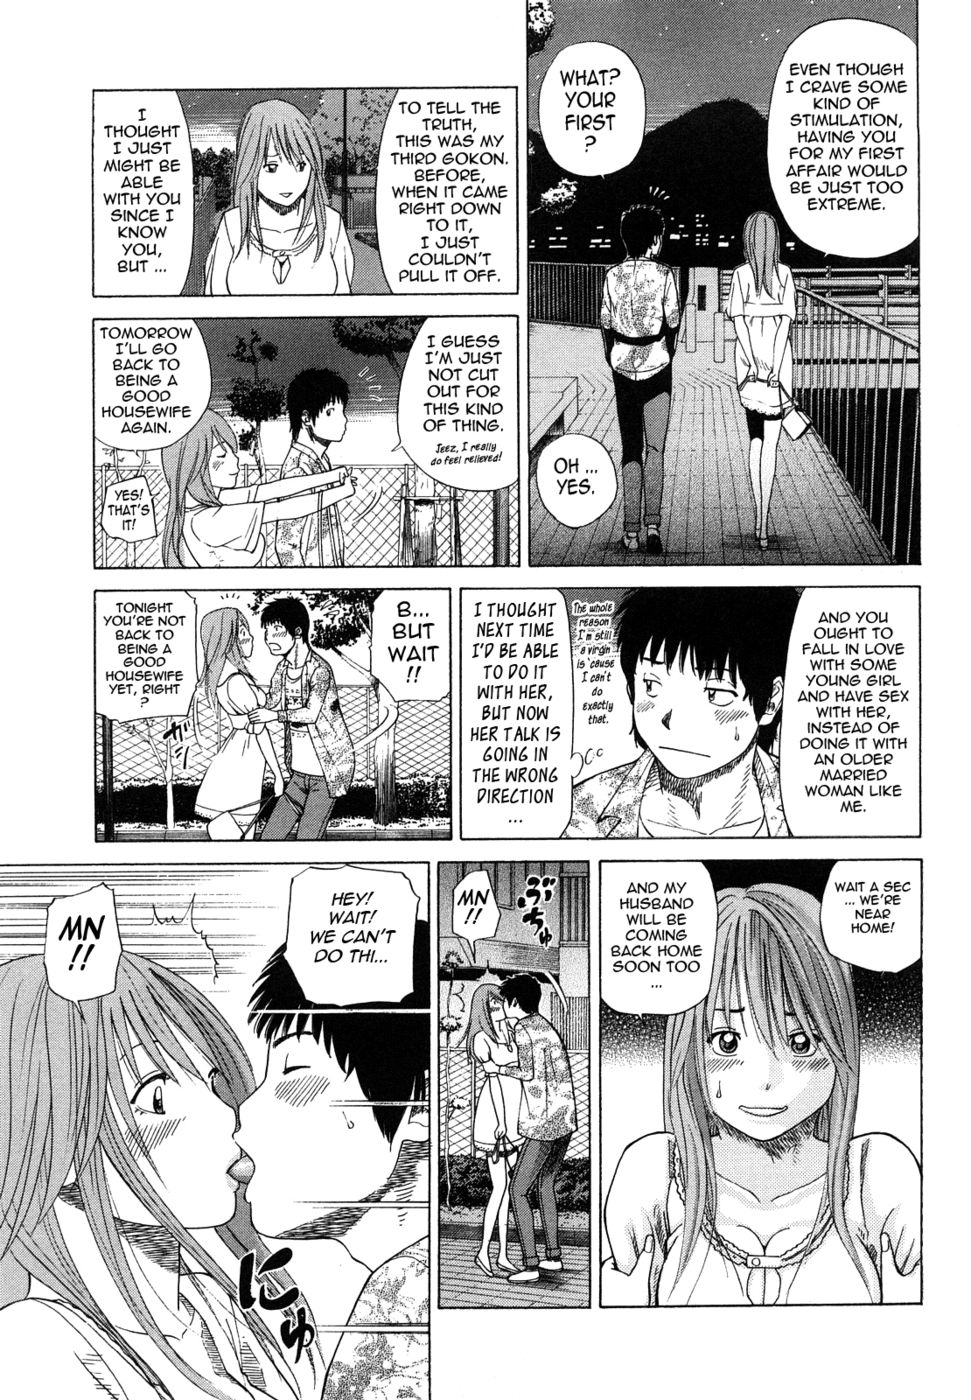 Virginity Hentai Boy Porn - Young Wife & High School Girl Collection-Chapter 10-Virgin Boy Complex-Hentai  Manga Hentai Comic - Page: 7 - Online porn video at mobile